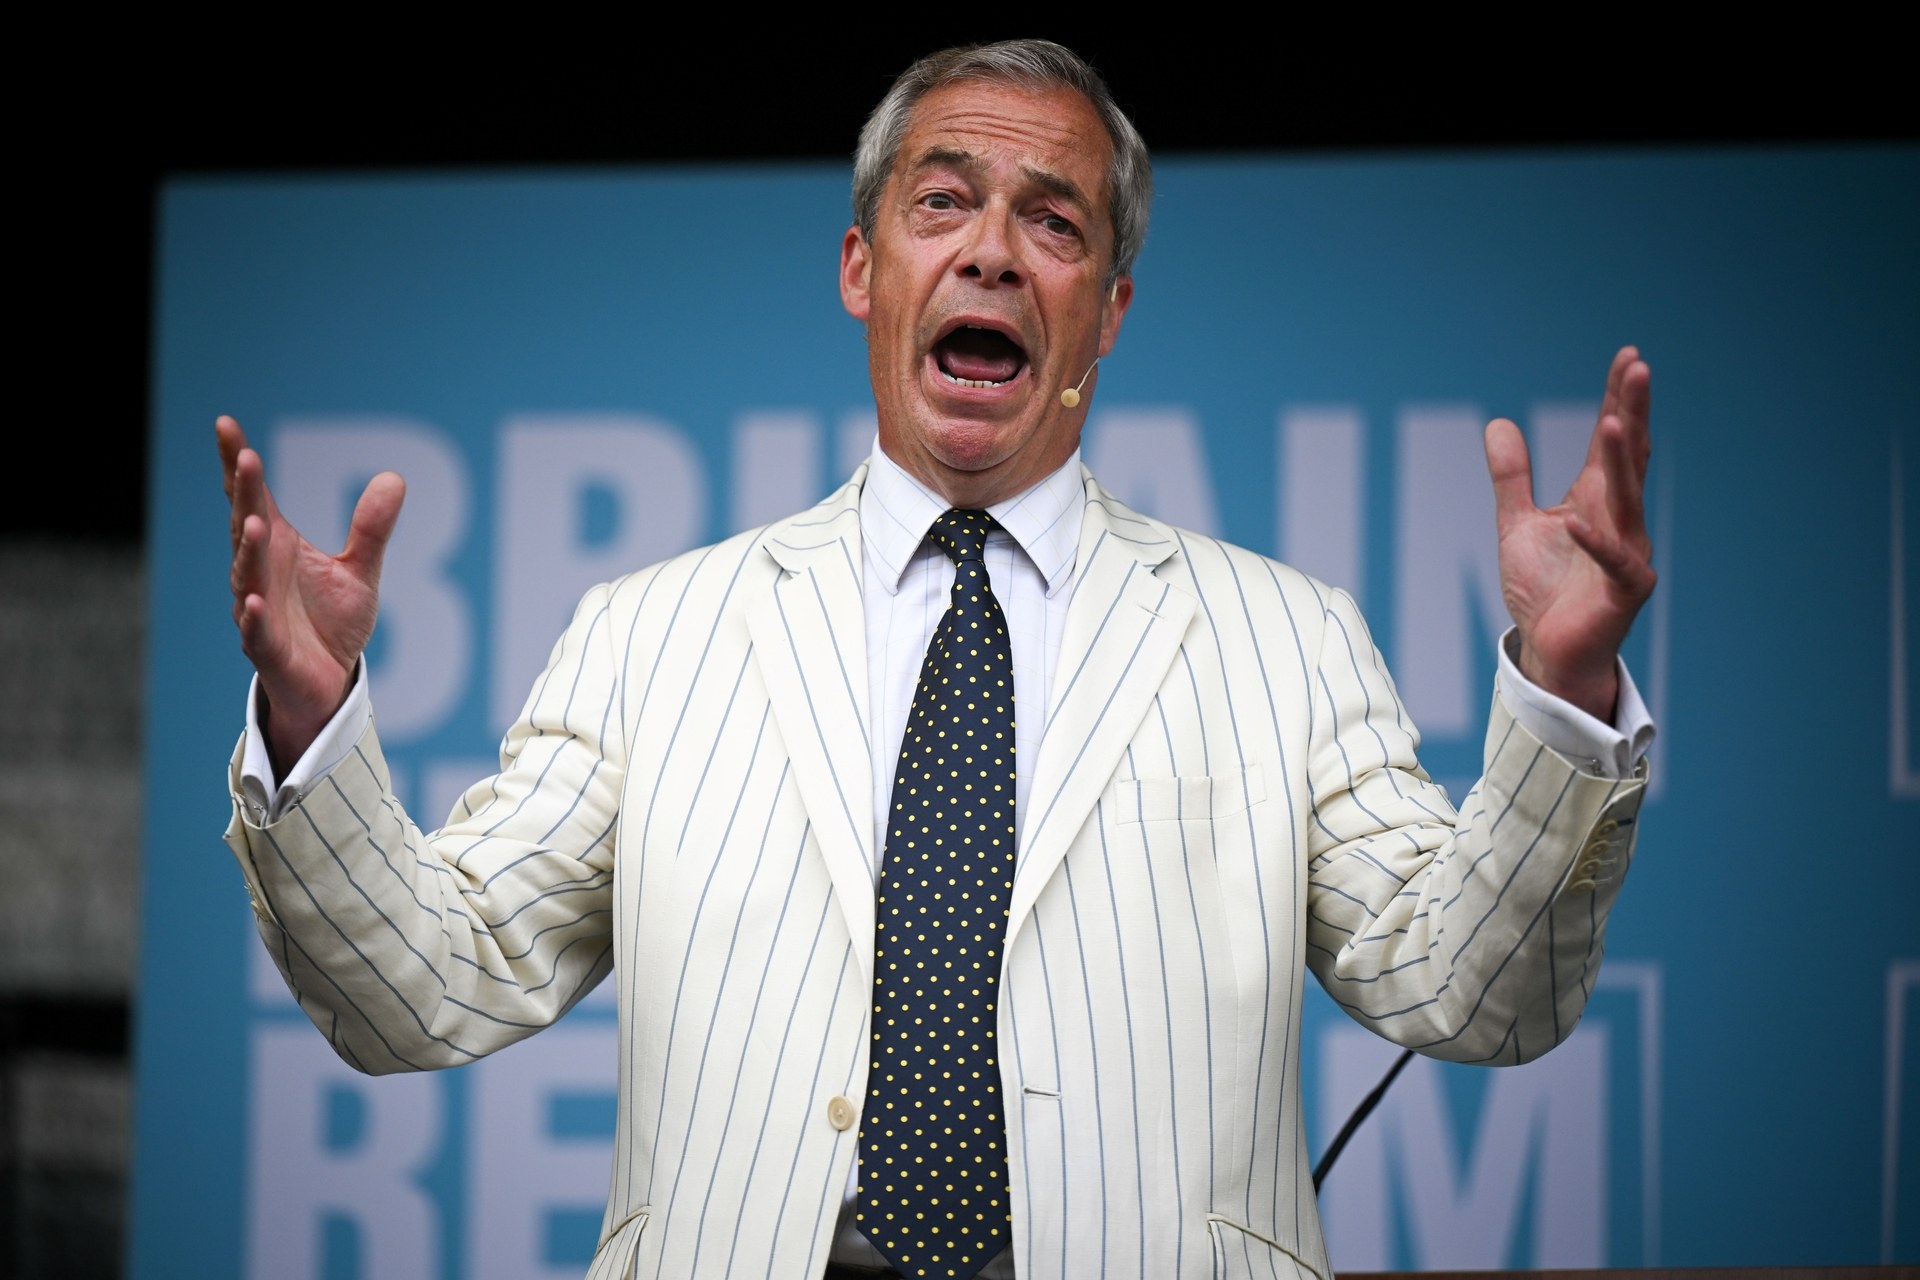 Nigel Farage's party has been dogged by allegations of racism, sexism and homophobia.